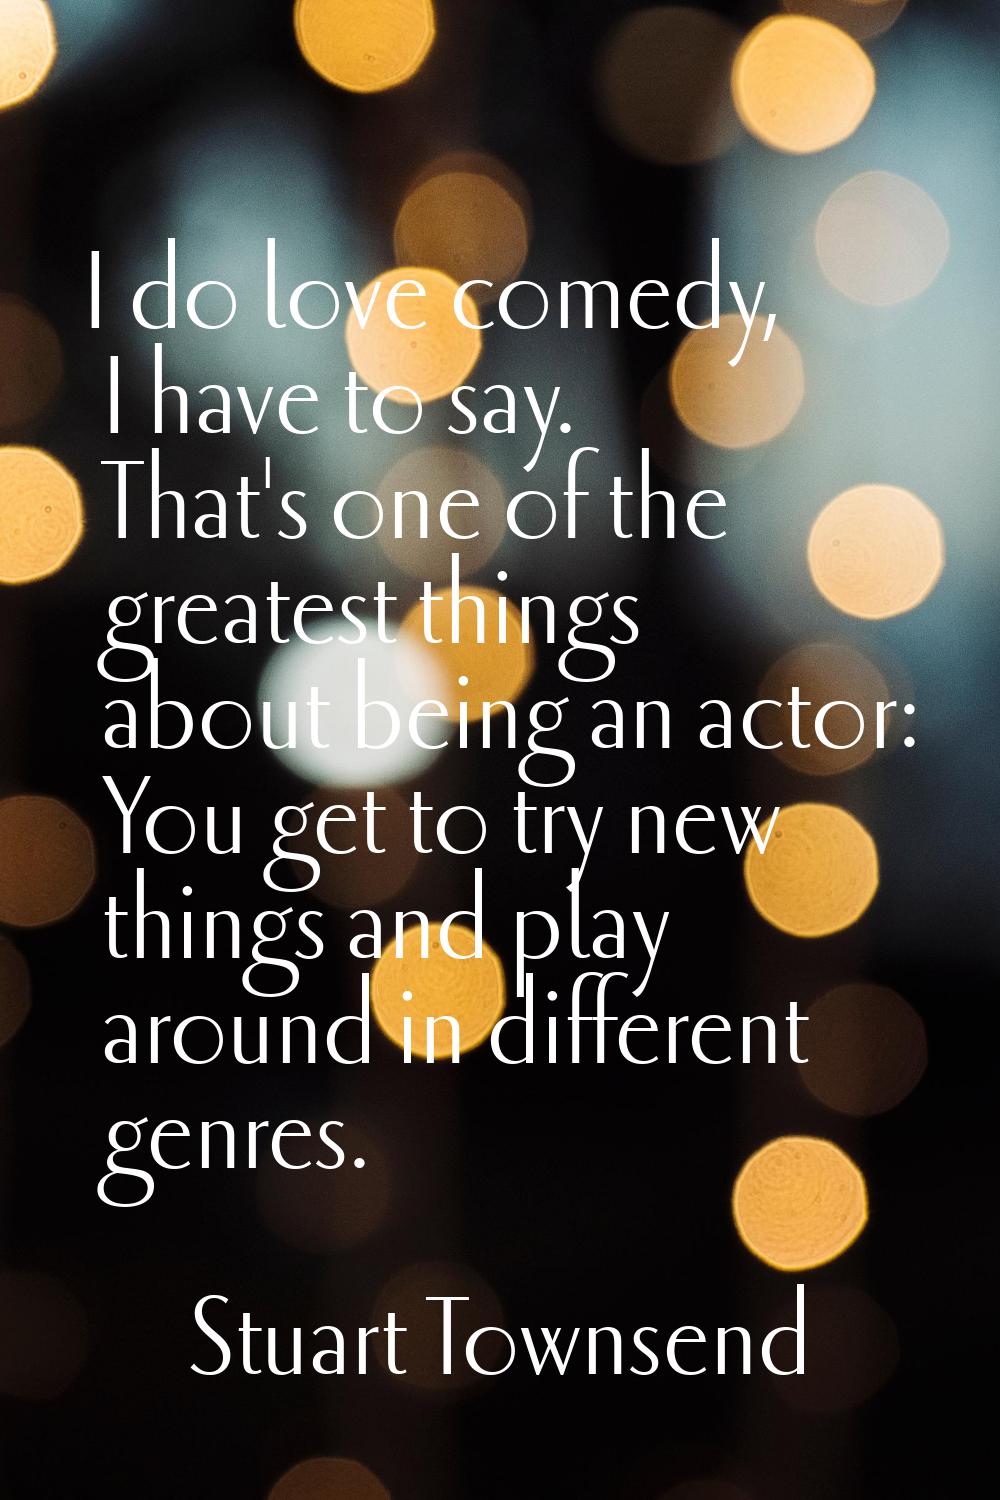 I do love comedy, I have to say. That's one of the greatest things about being an actor: You get to